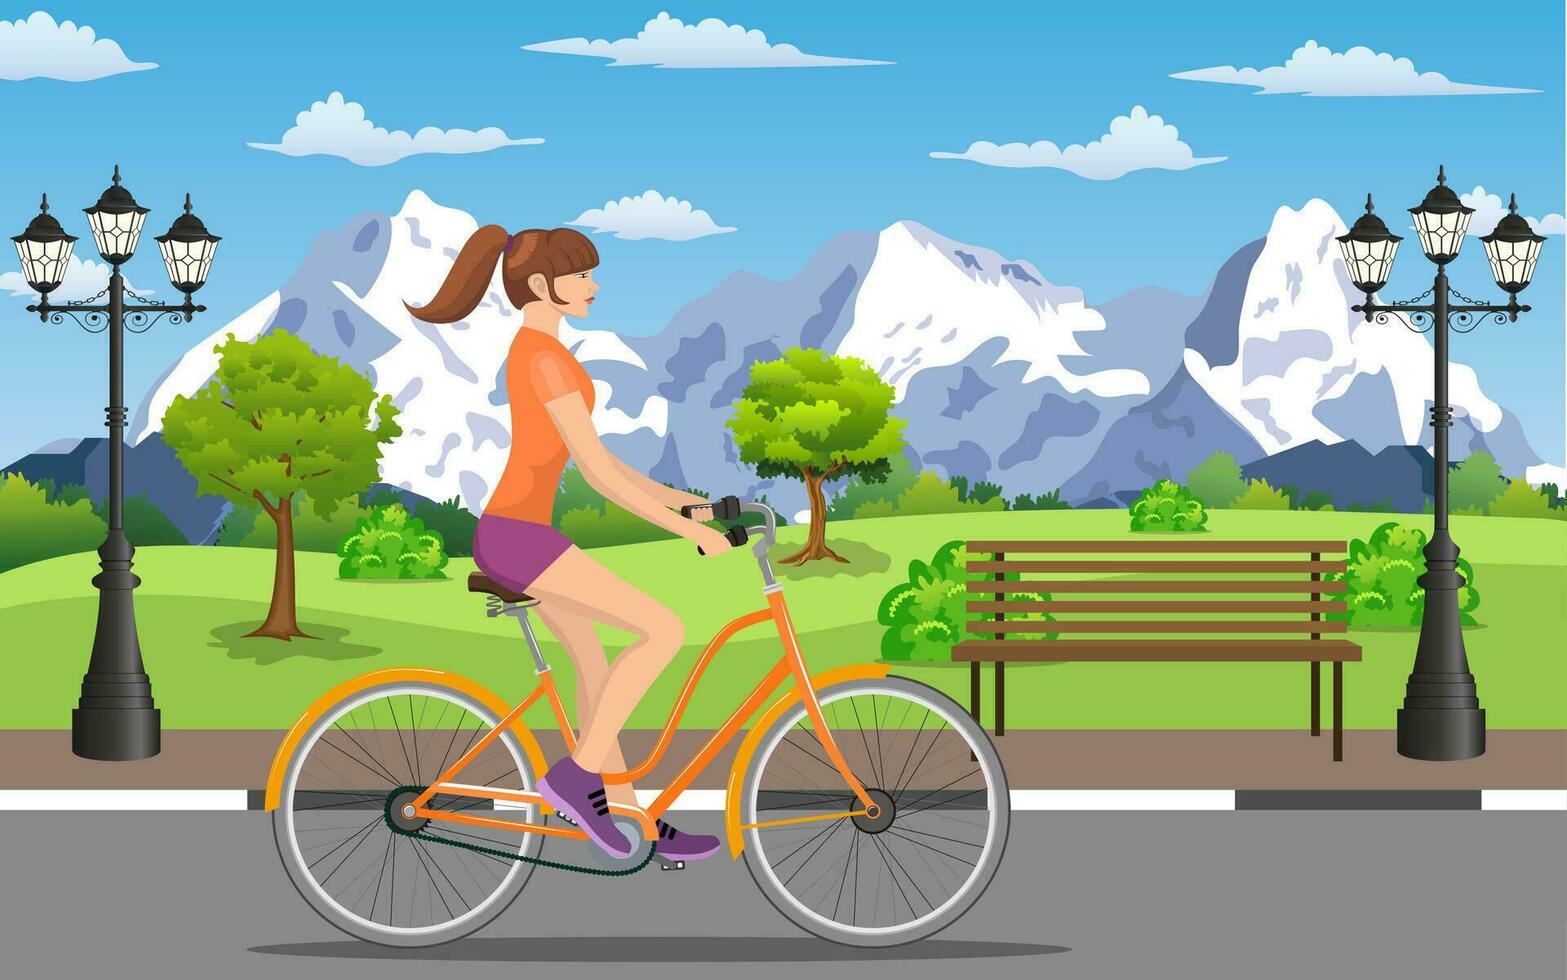 Couple Riding Bicycles In Public Park, vector